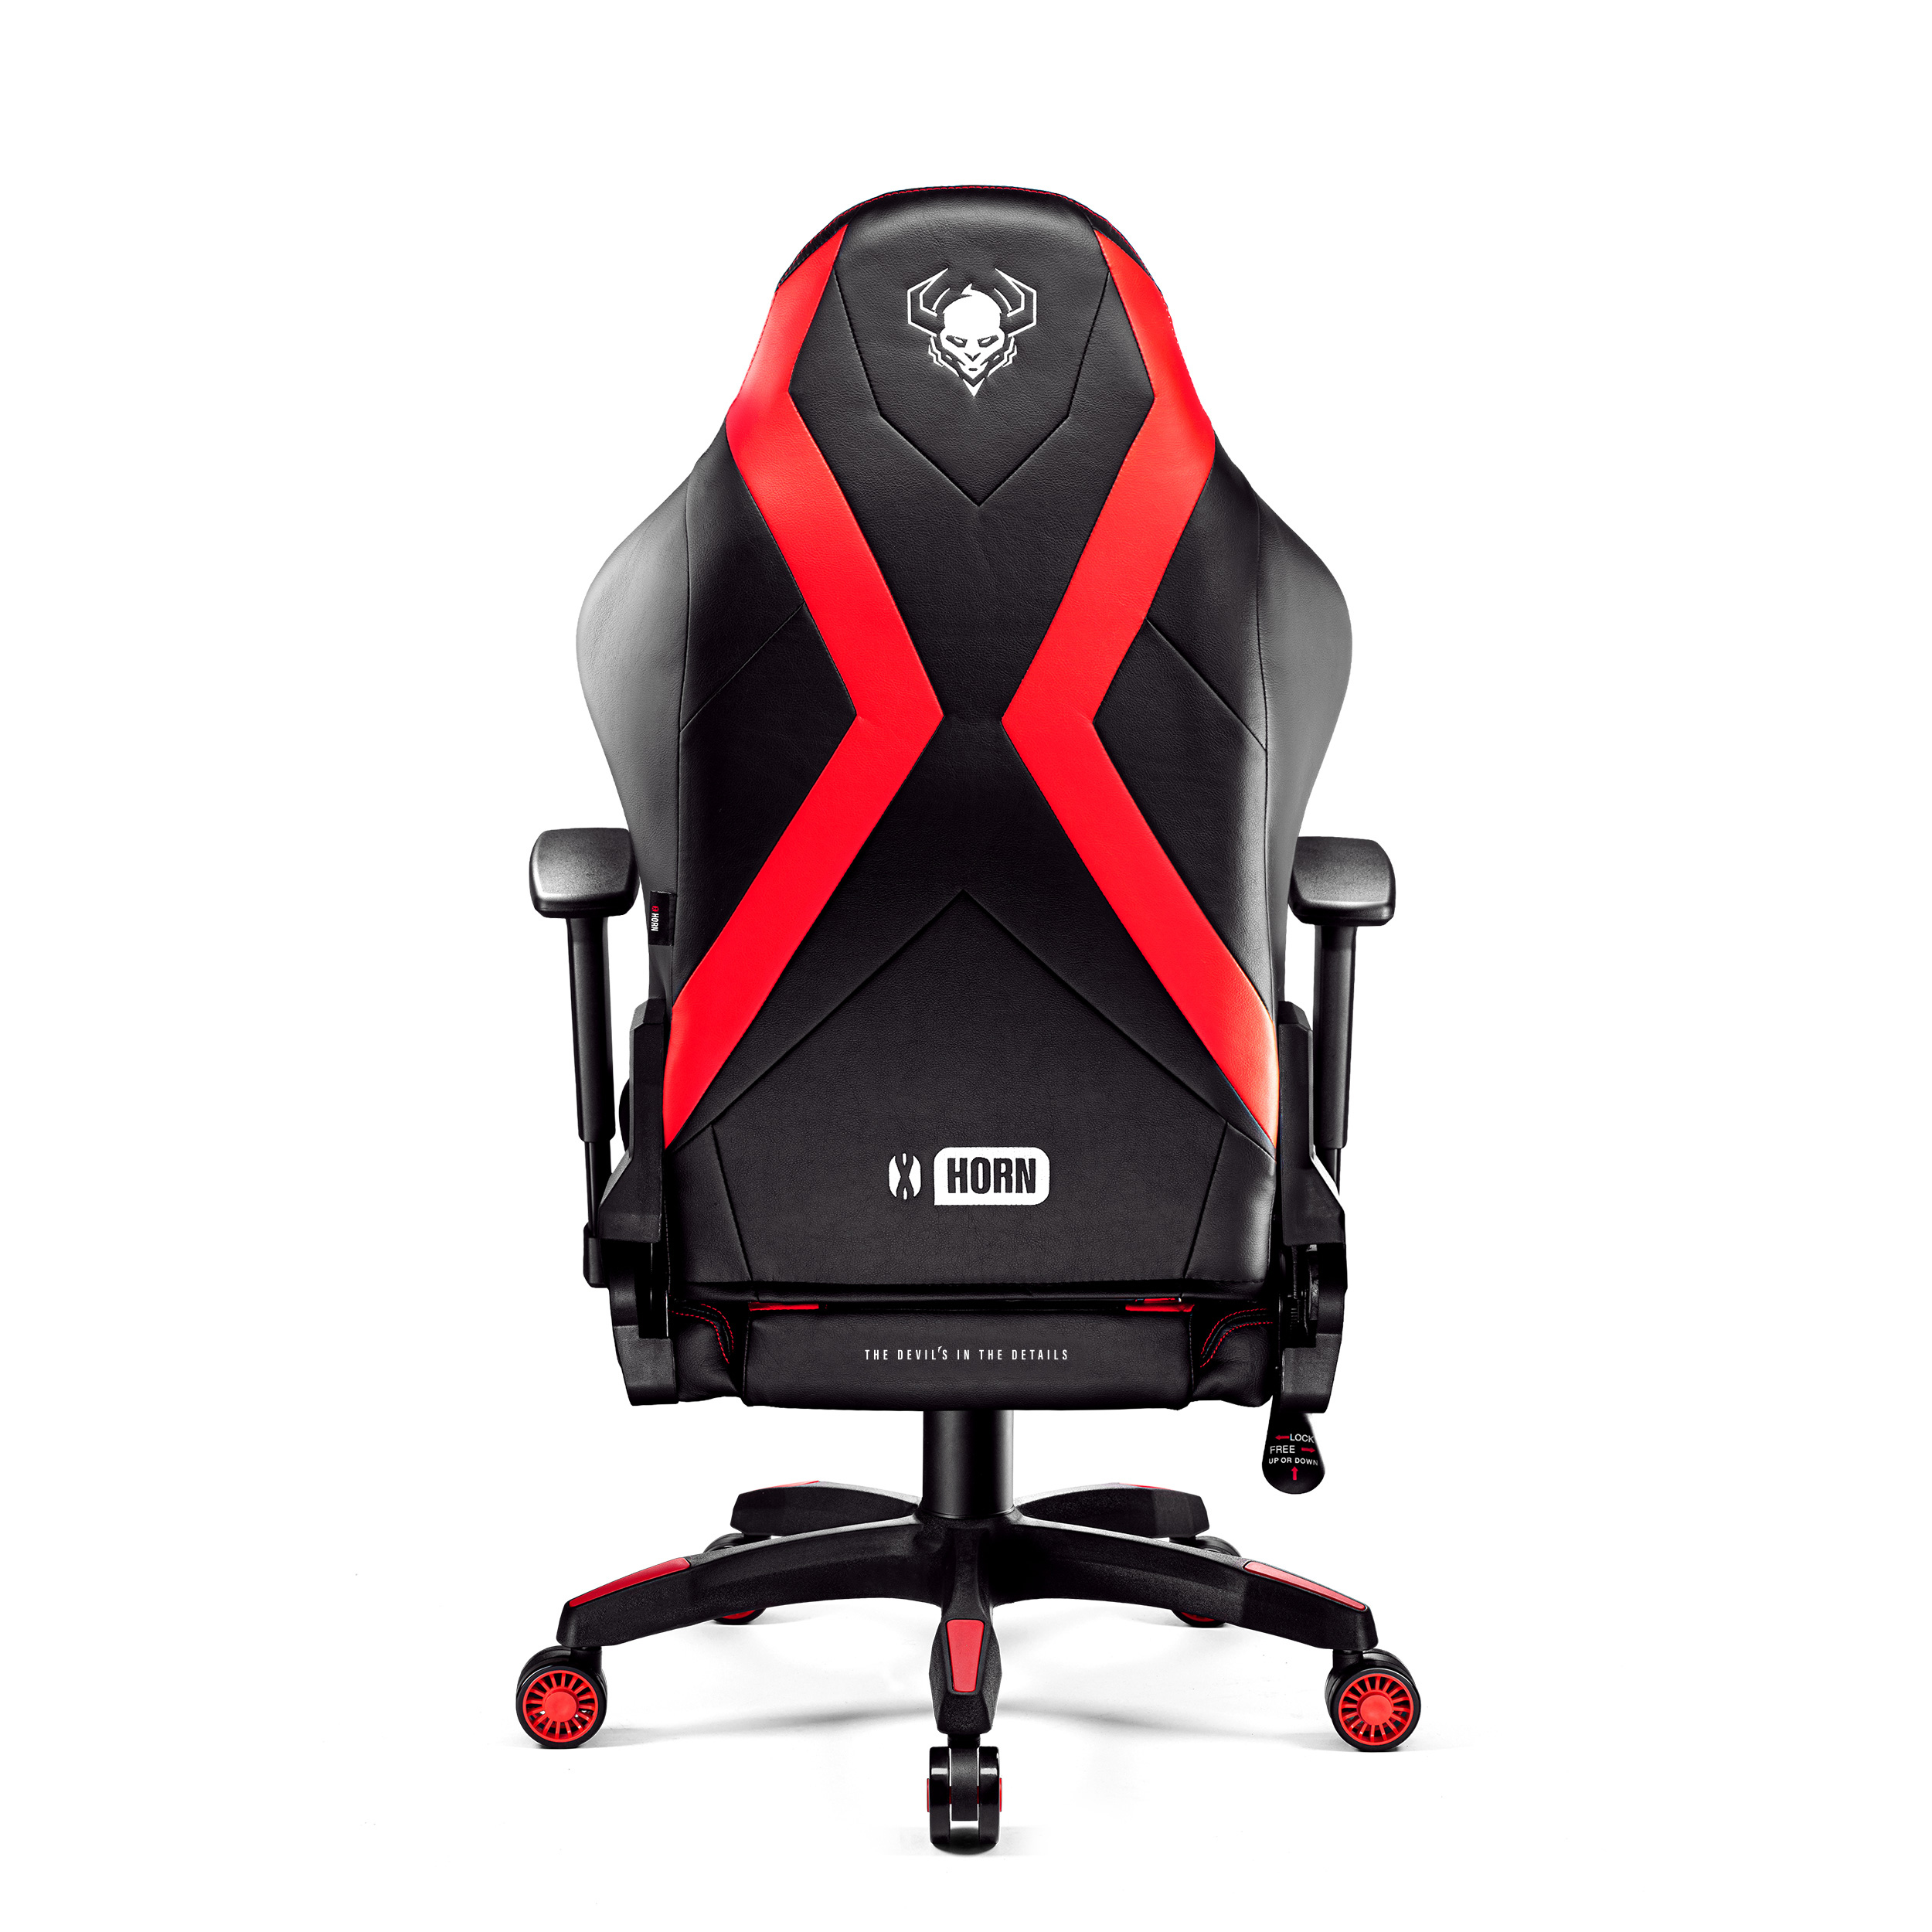 DIABLO CHAIRS GAMING Chair, Gaming black/red X-HORN NORMAL STUHL 2.0